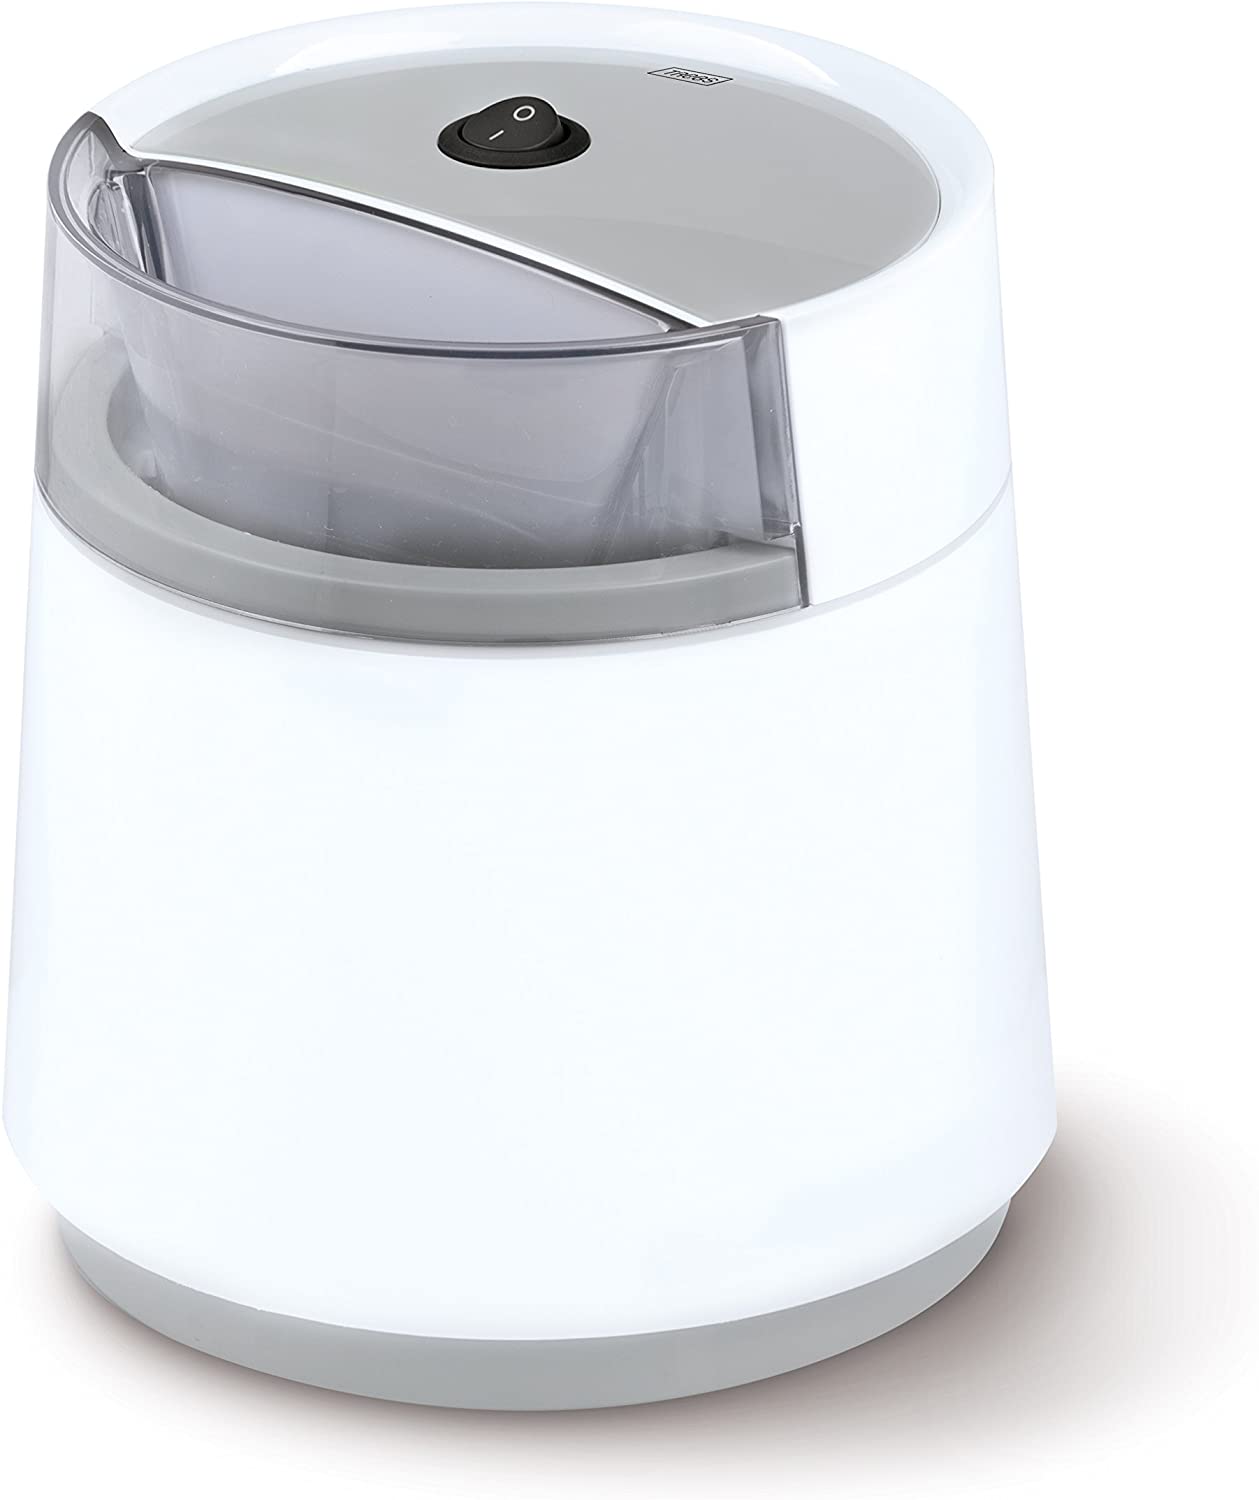 Trebs Duo Ice Cream Maker for Milkshakes and Sorbets, Recipe Suggestions, 700 ml